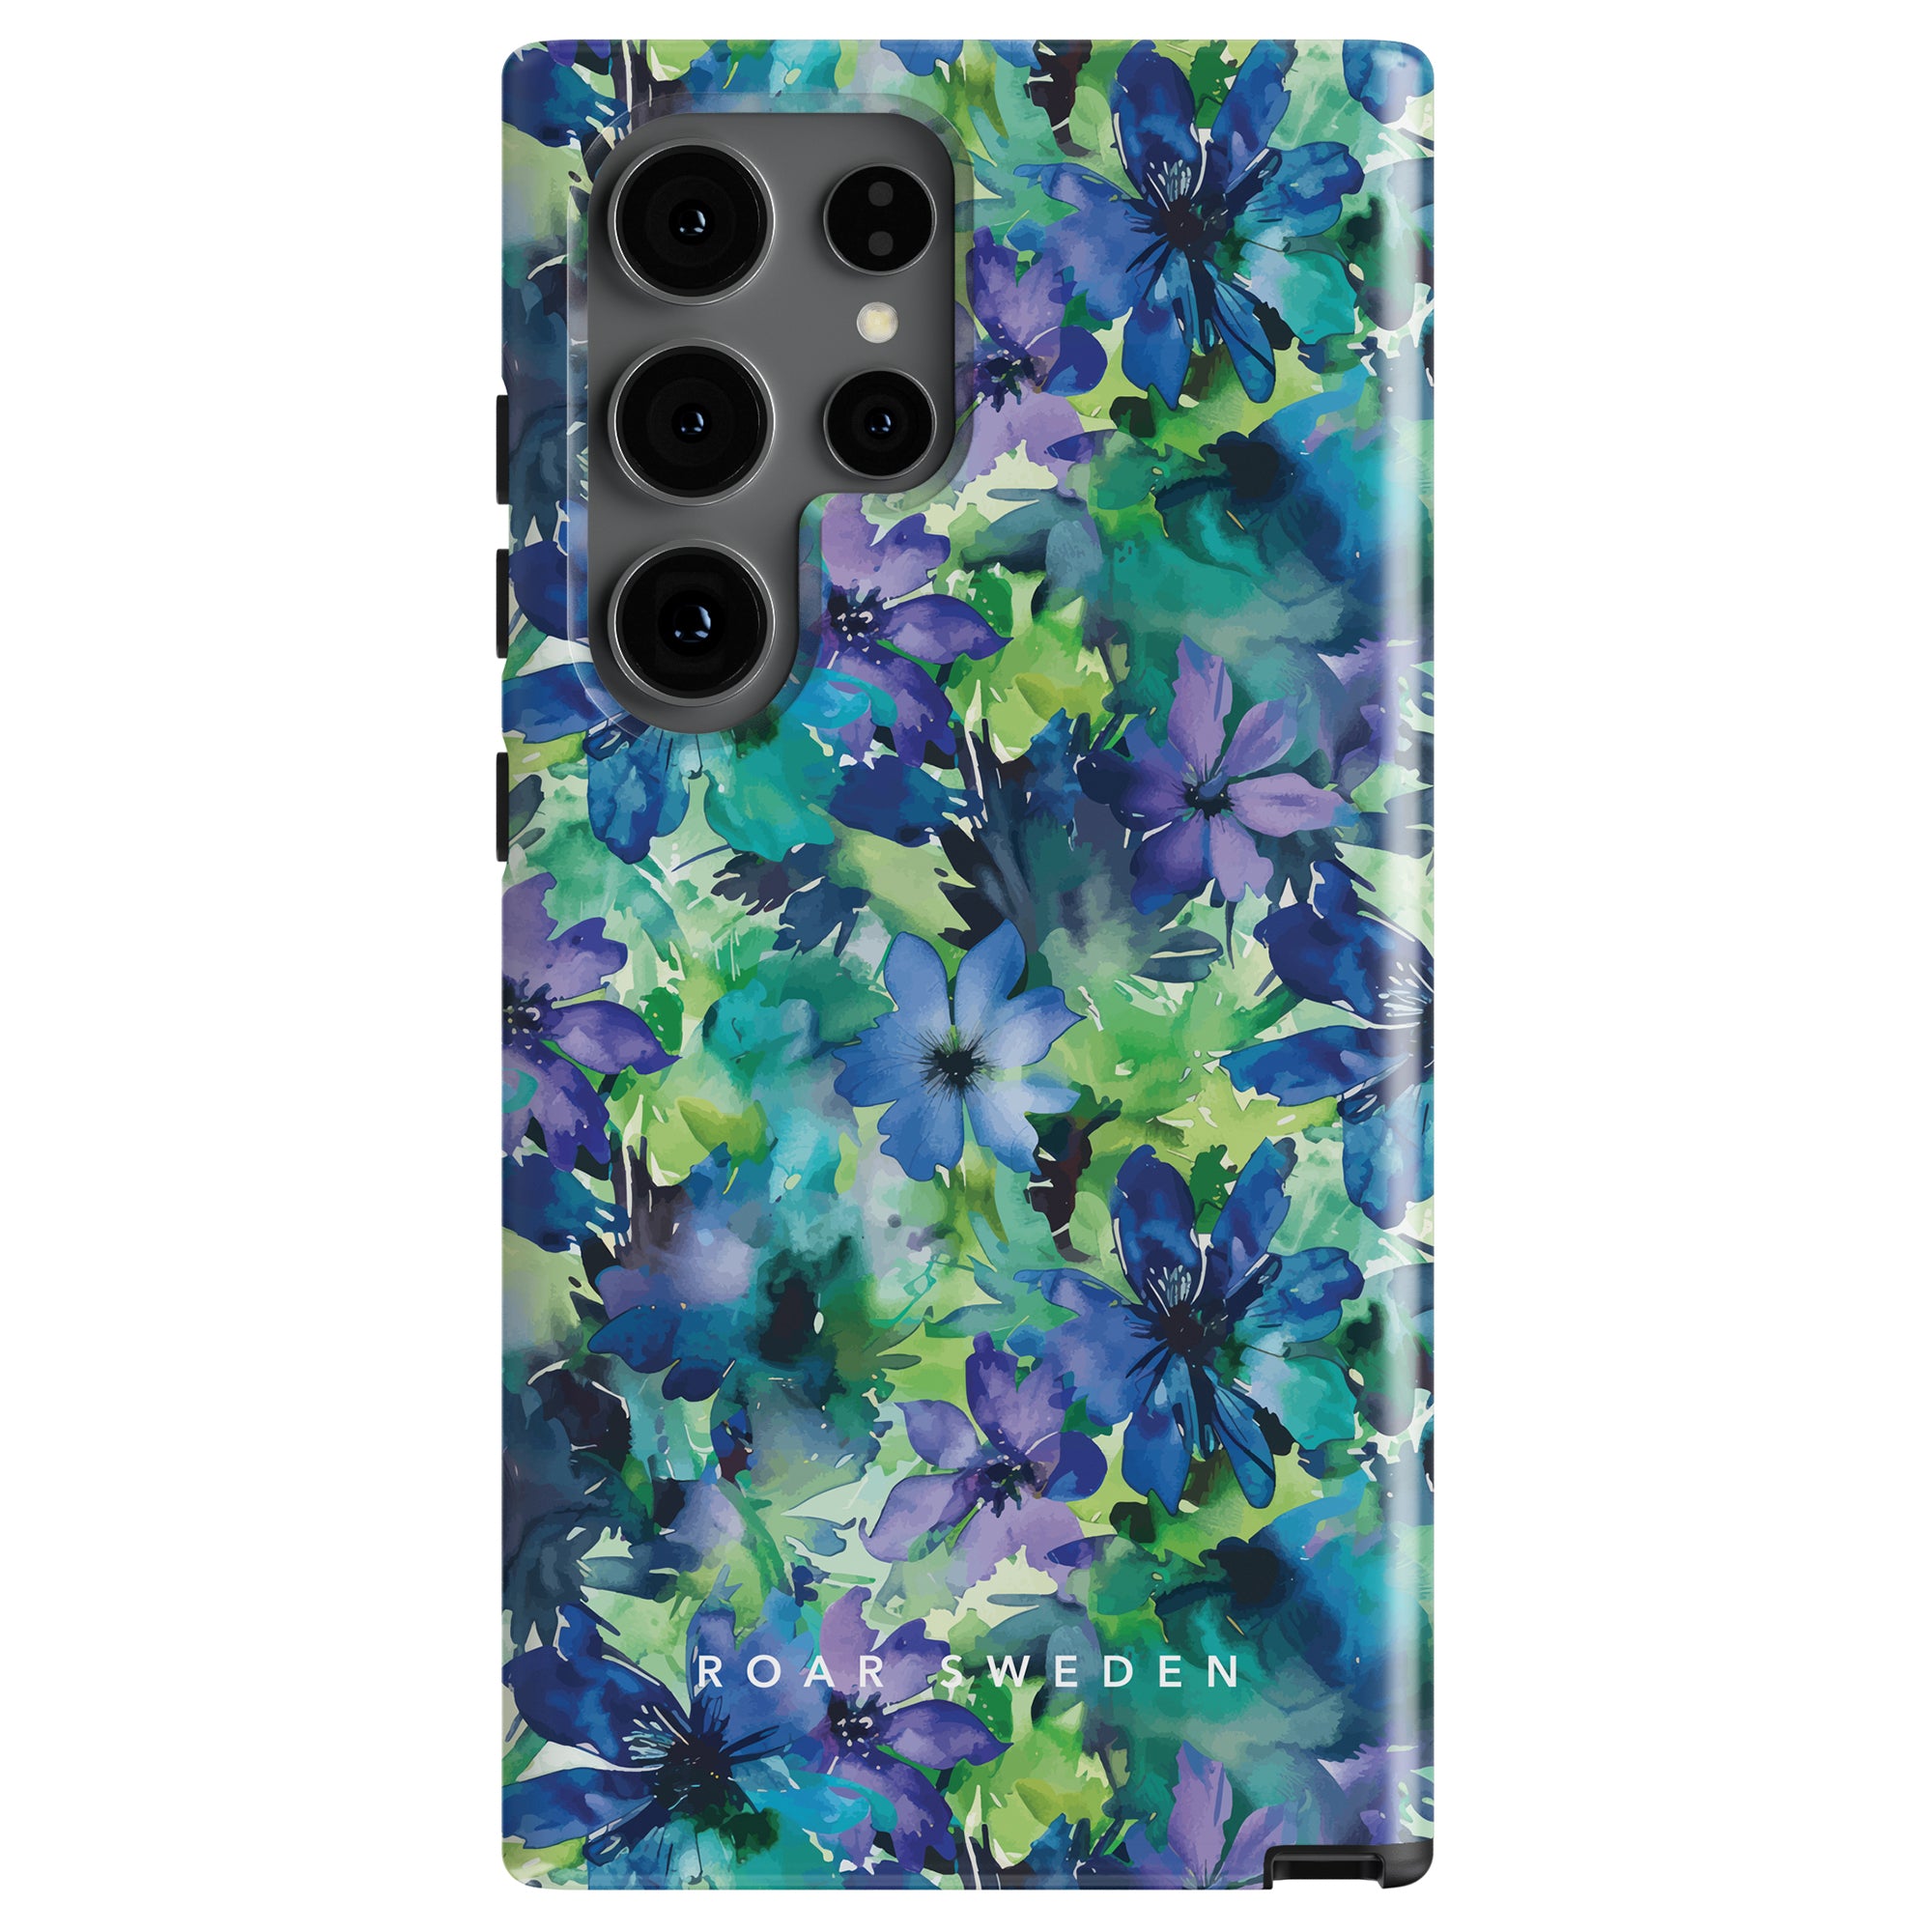 A Sweet Flower - Tough Case from the Floral Collection features a sweet flower blue and green design with "ROAR SWEDEN" at the bottom. The camera cutout is visible on the upper left side, offering both style and functionality.